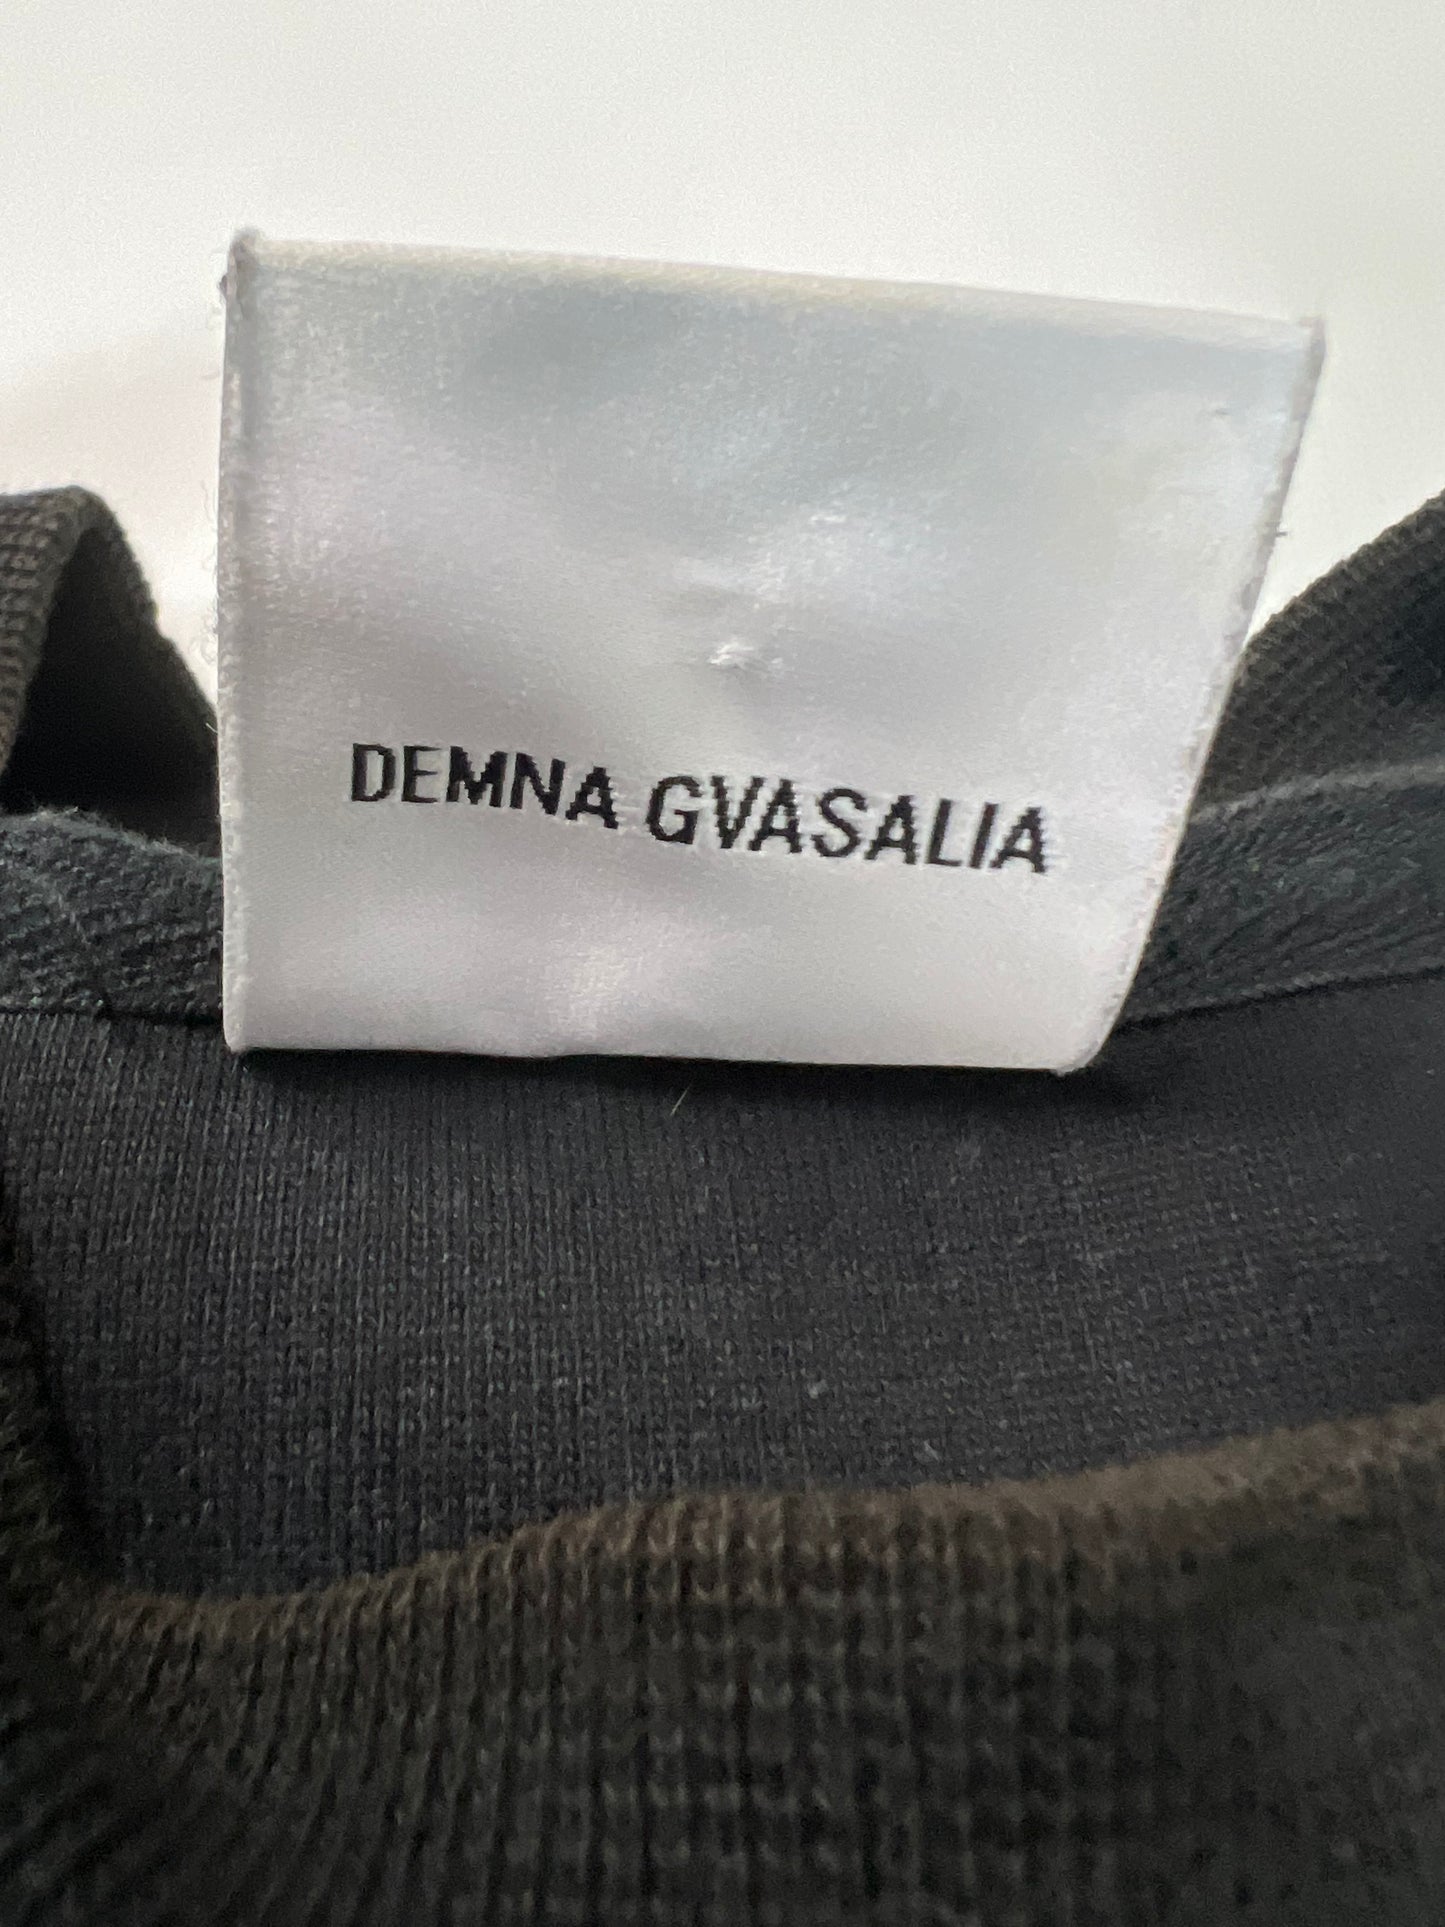 Vetements AW16 Shoulder Padded Total Fucking Darkness longsleeve T-Shirt SZ:S